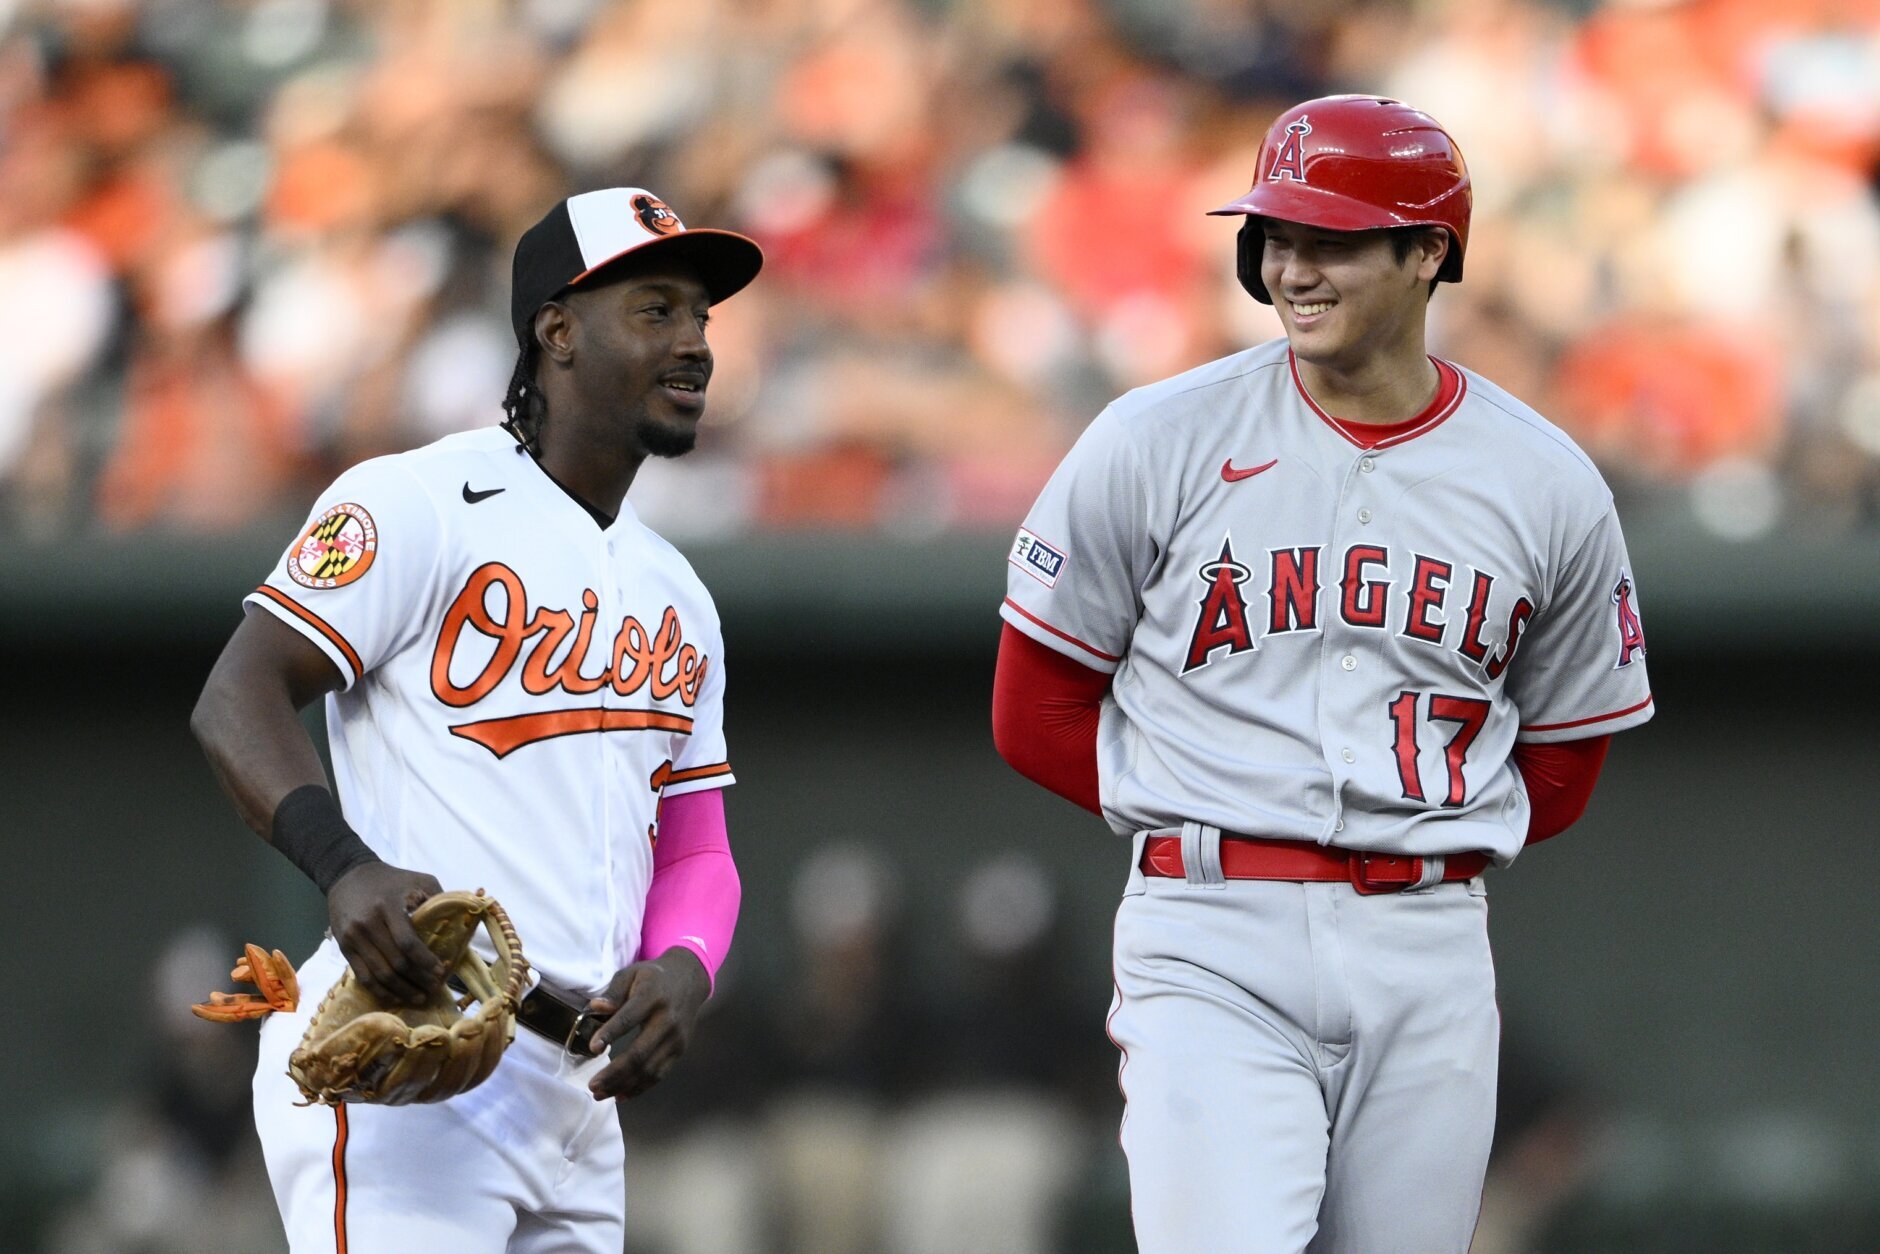 Ohtani pitches 7 innings, reaches base 5 times as Angels beat Orioles 9